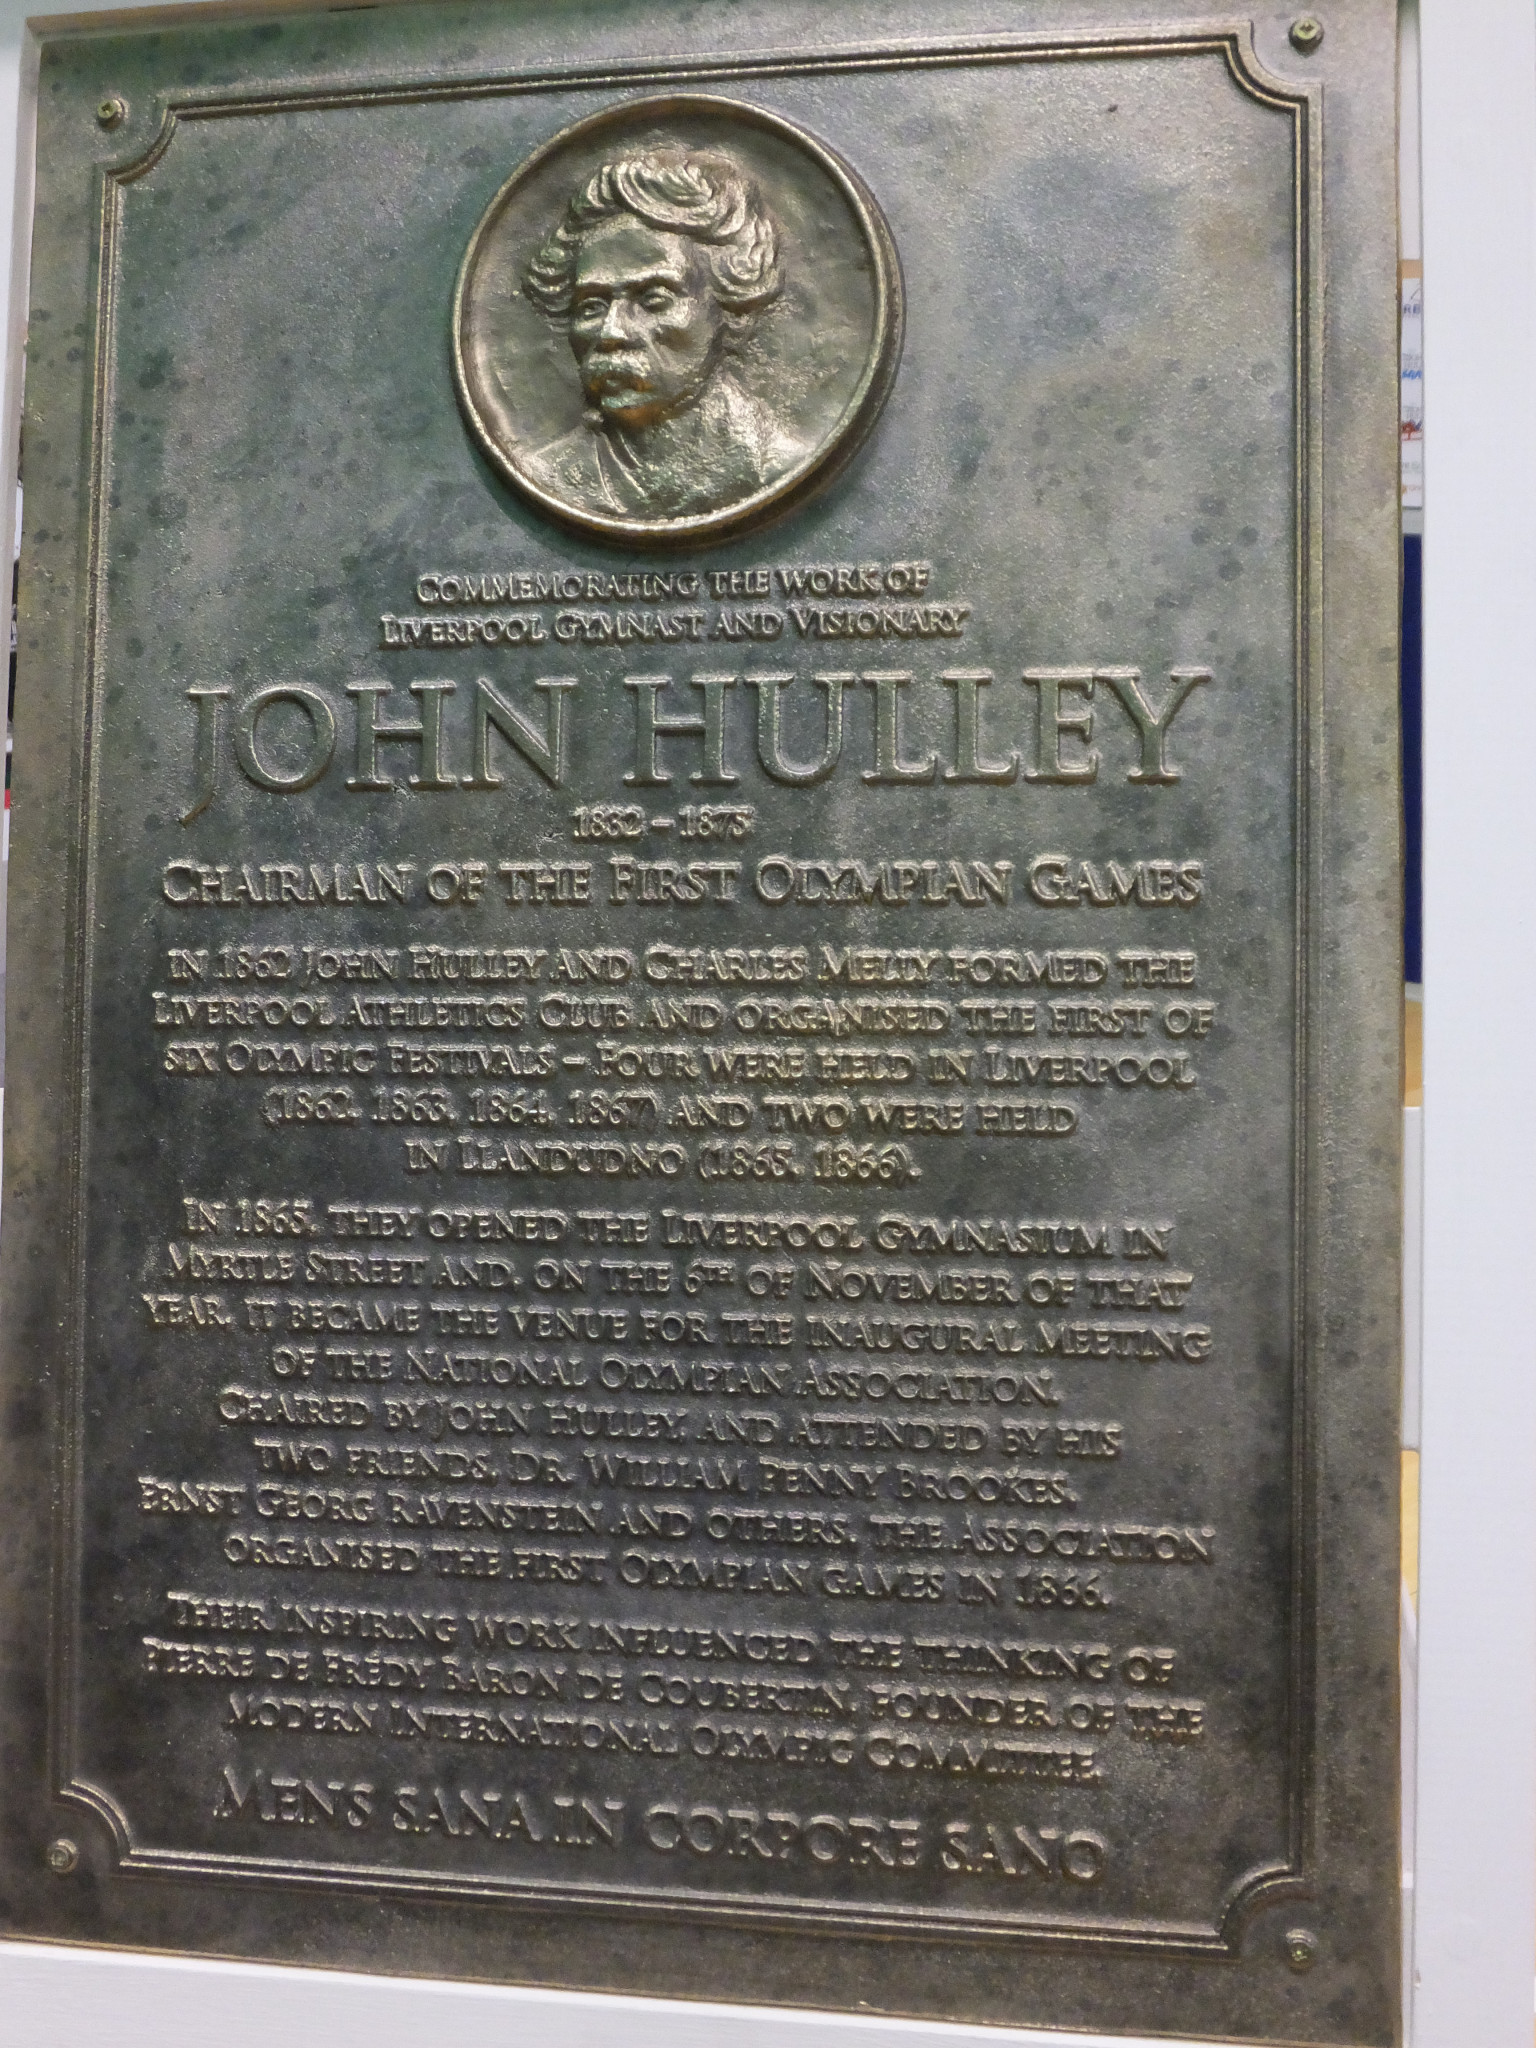 The grave of John Hulley in Toxteth, Liverpool  ©Ray Hulley 